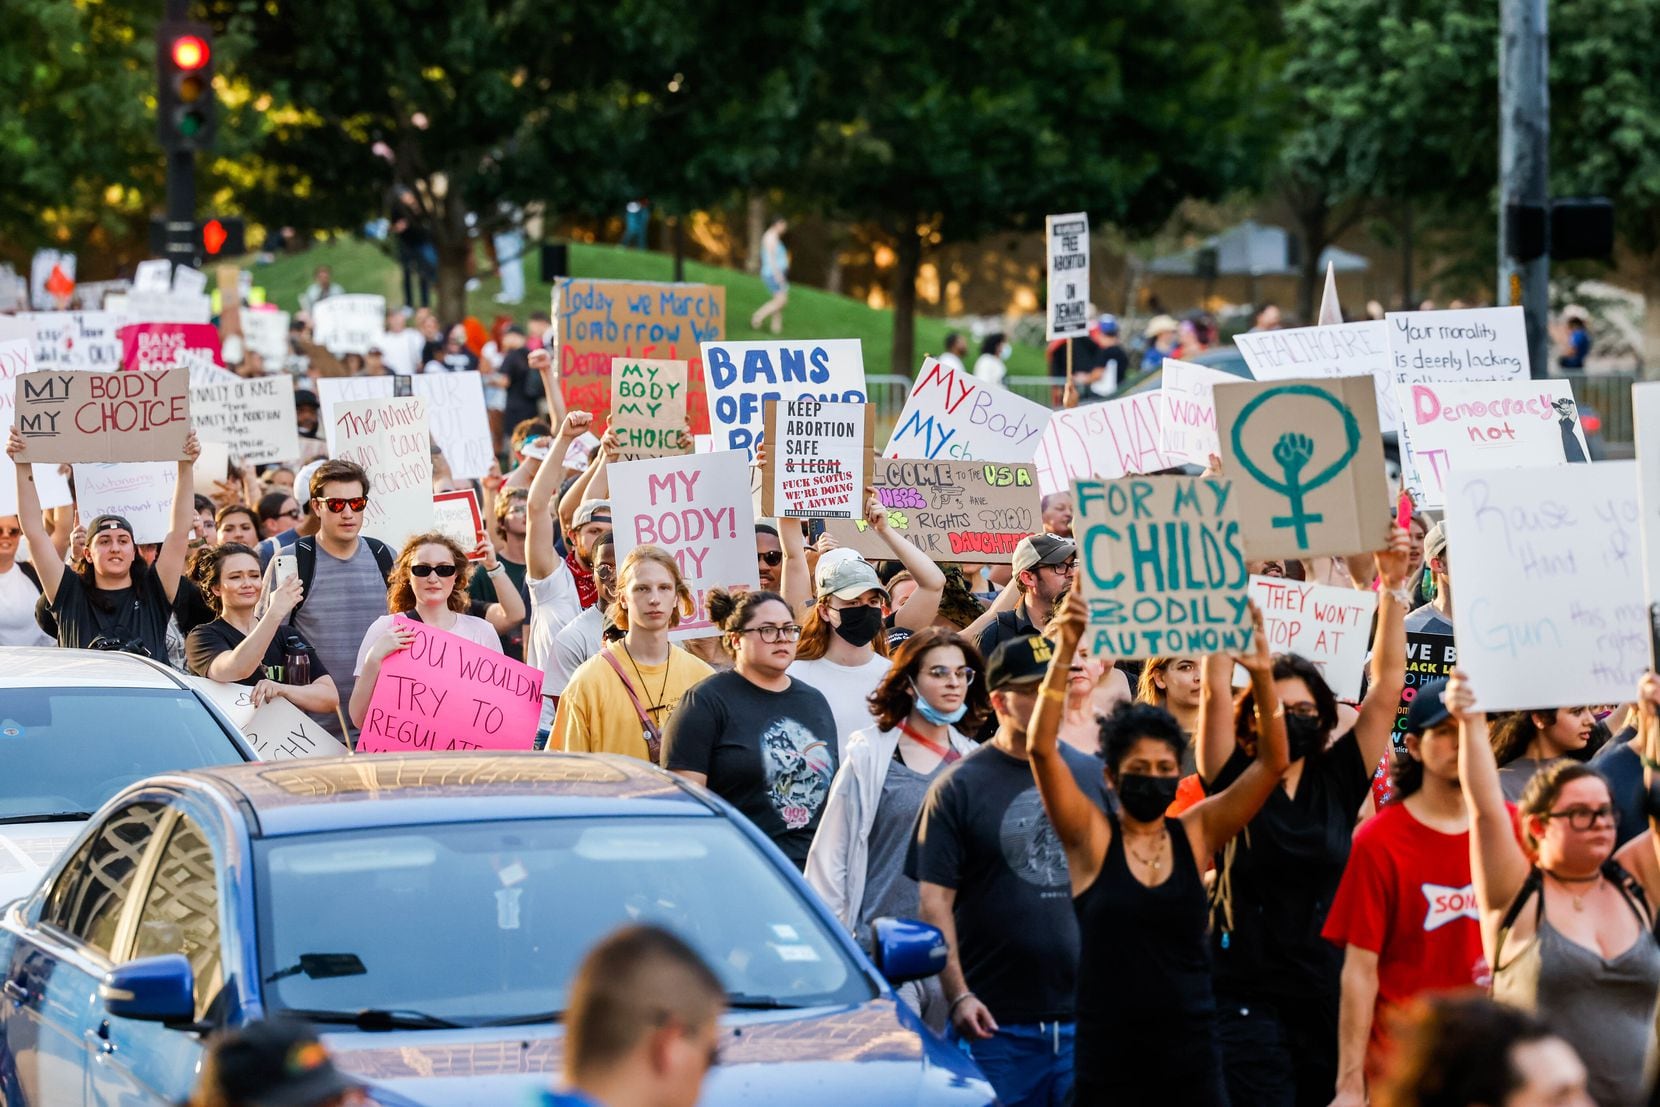 A group of demonstrators march from the Civic Garden along Main Street in downtown Dallas.